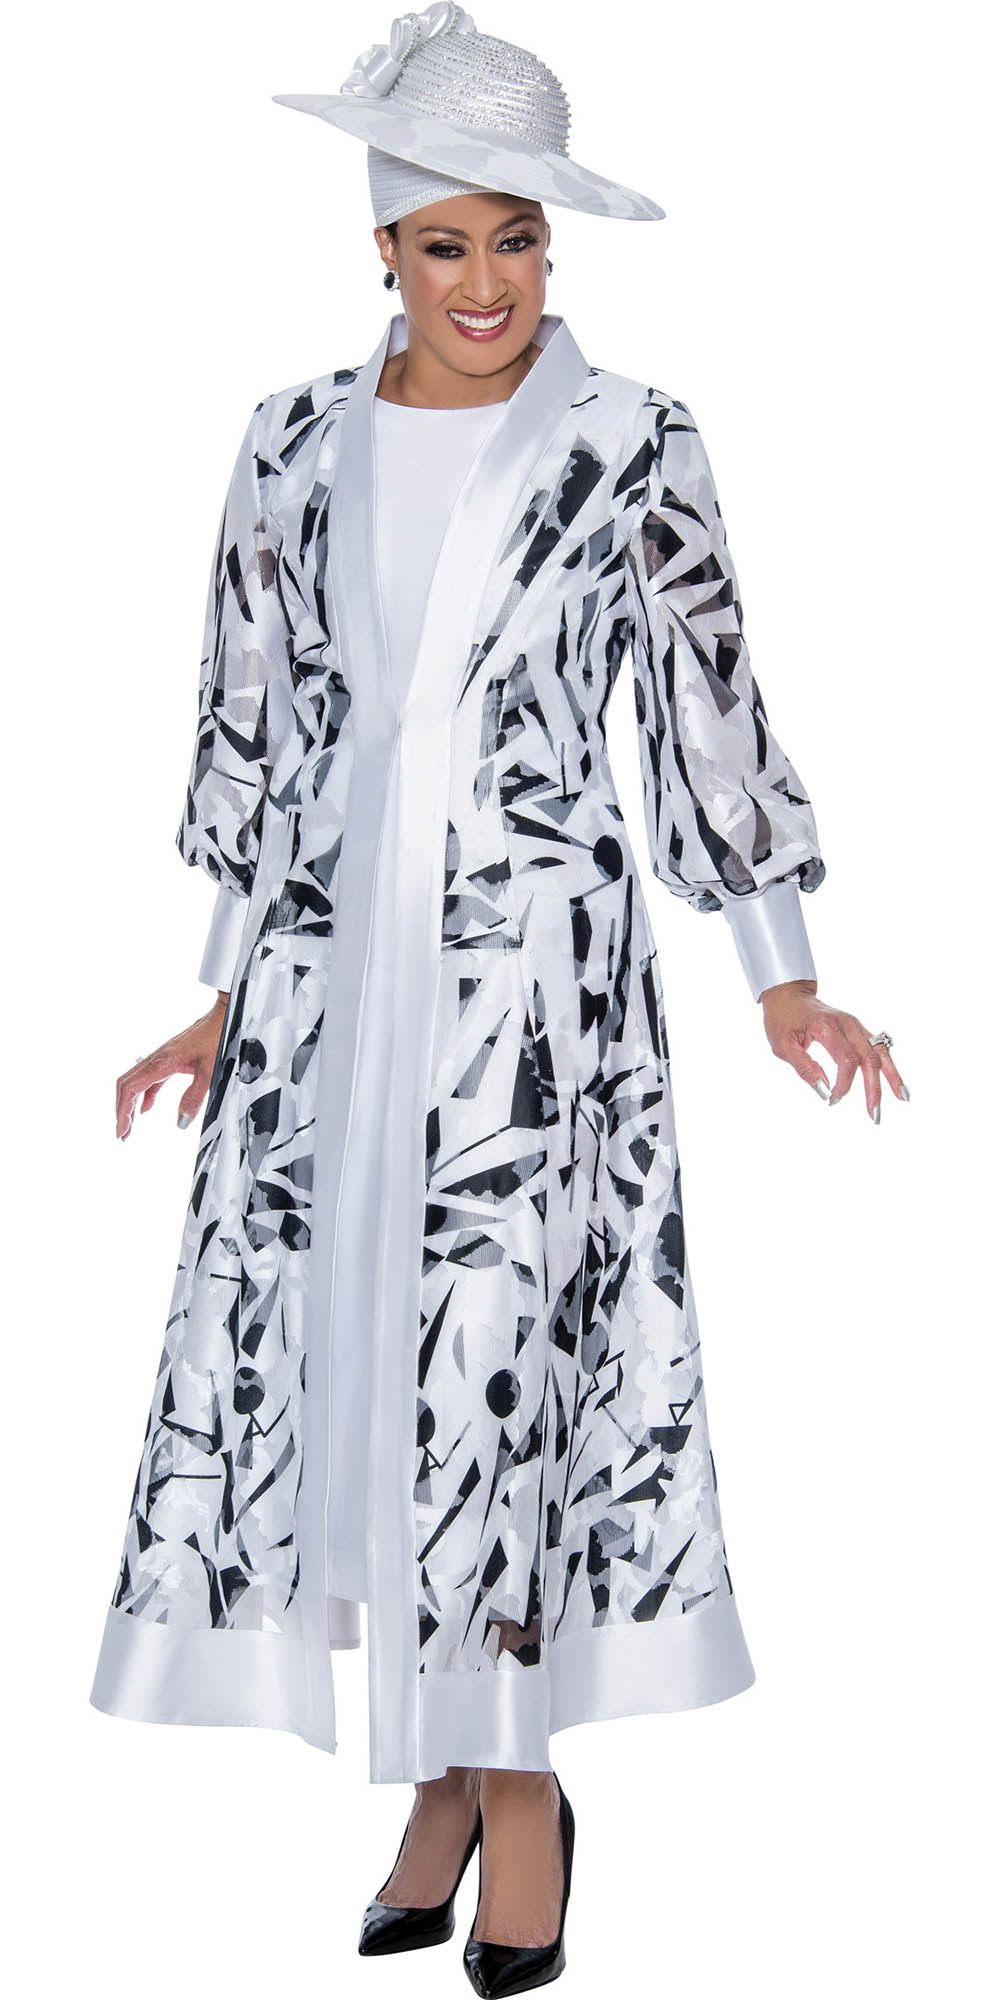 DCC - DCC4472 Dress with Duster Jacket and Bishop Sleeves